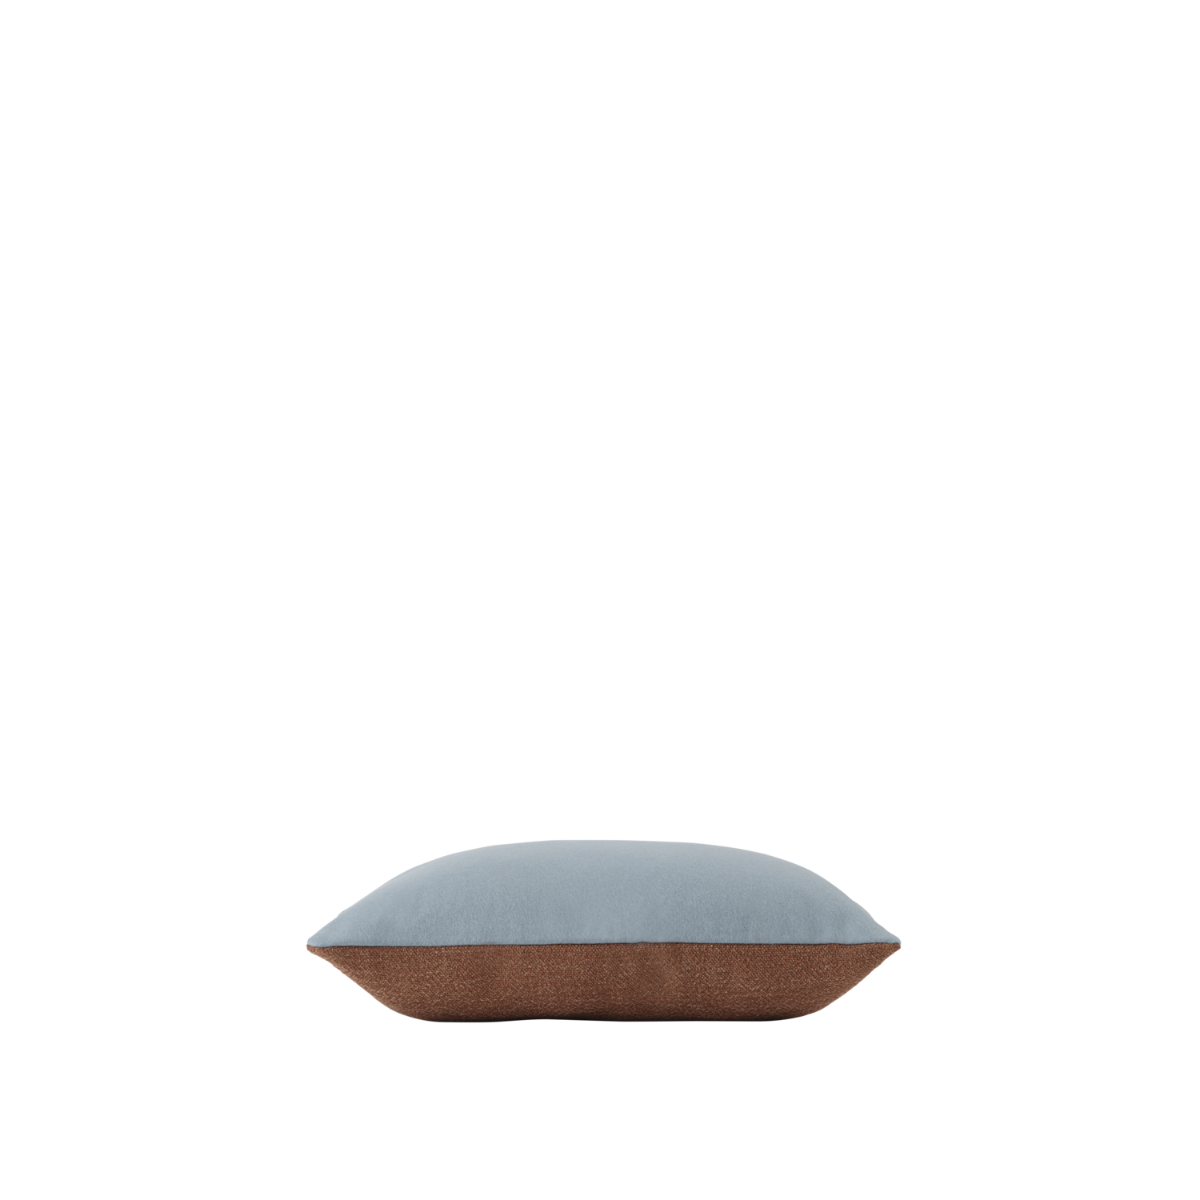 https://www.fundesign.nl/media/catalog/product/2/4/24286-en-mingle-cushion-copper-brown-light-blue-angle-muuto-5000x5000-hi-res_1_.png